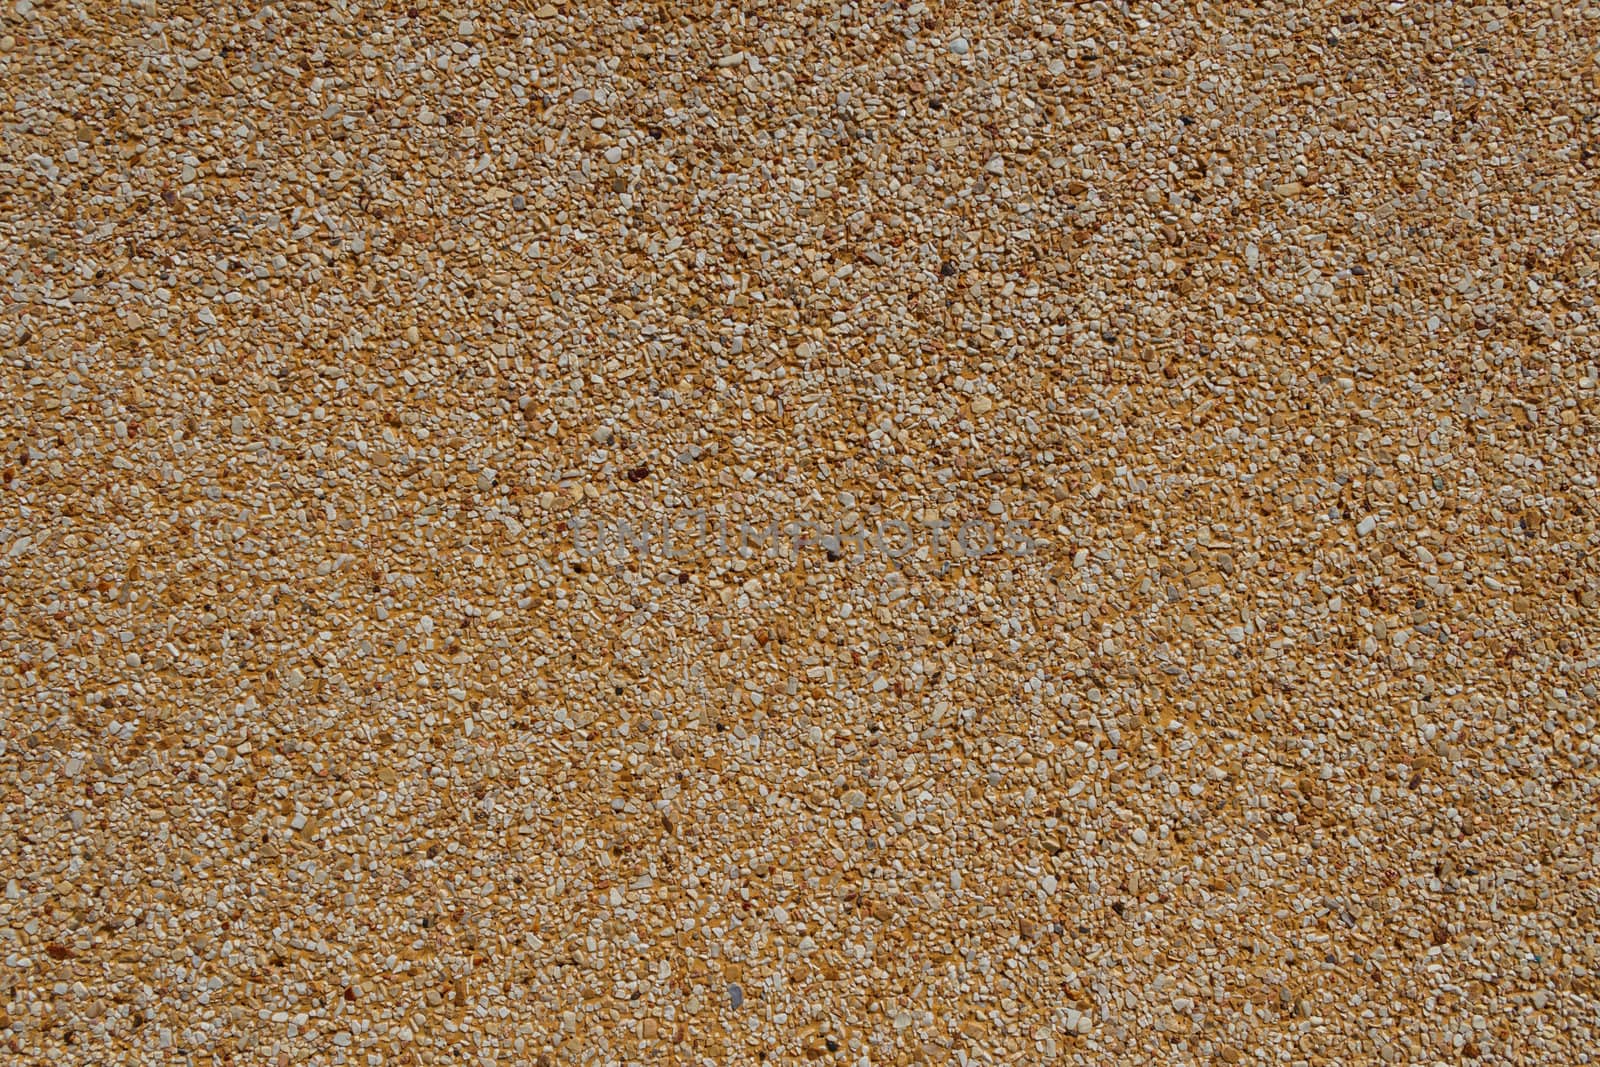 Tiny gravel texture on brown concrete wall in sunny day